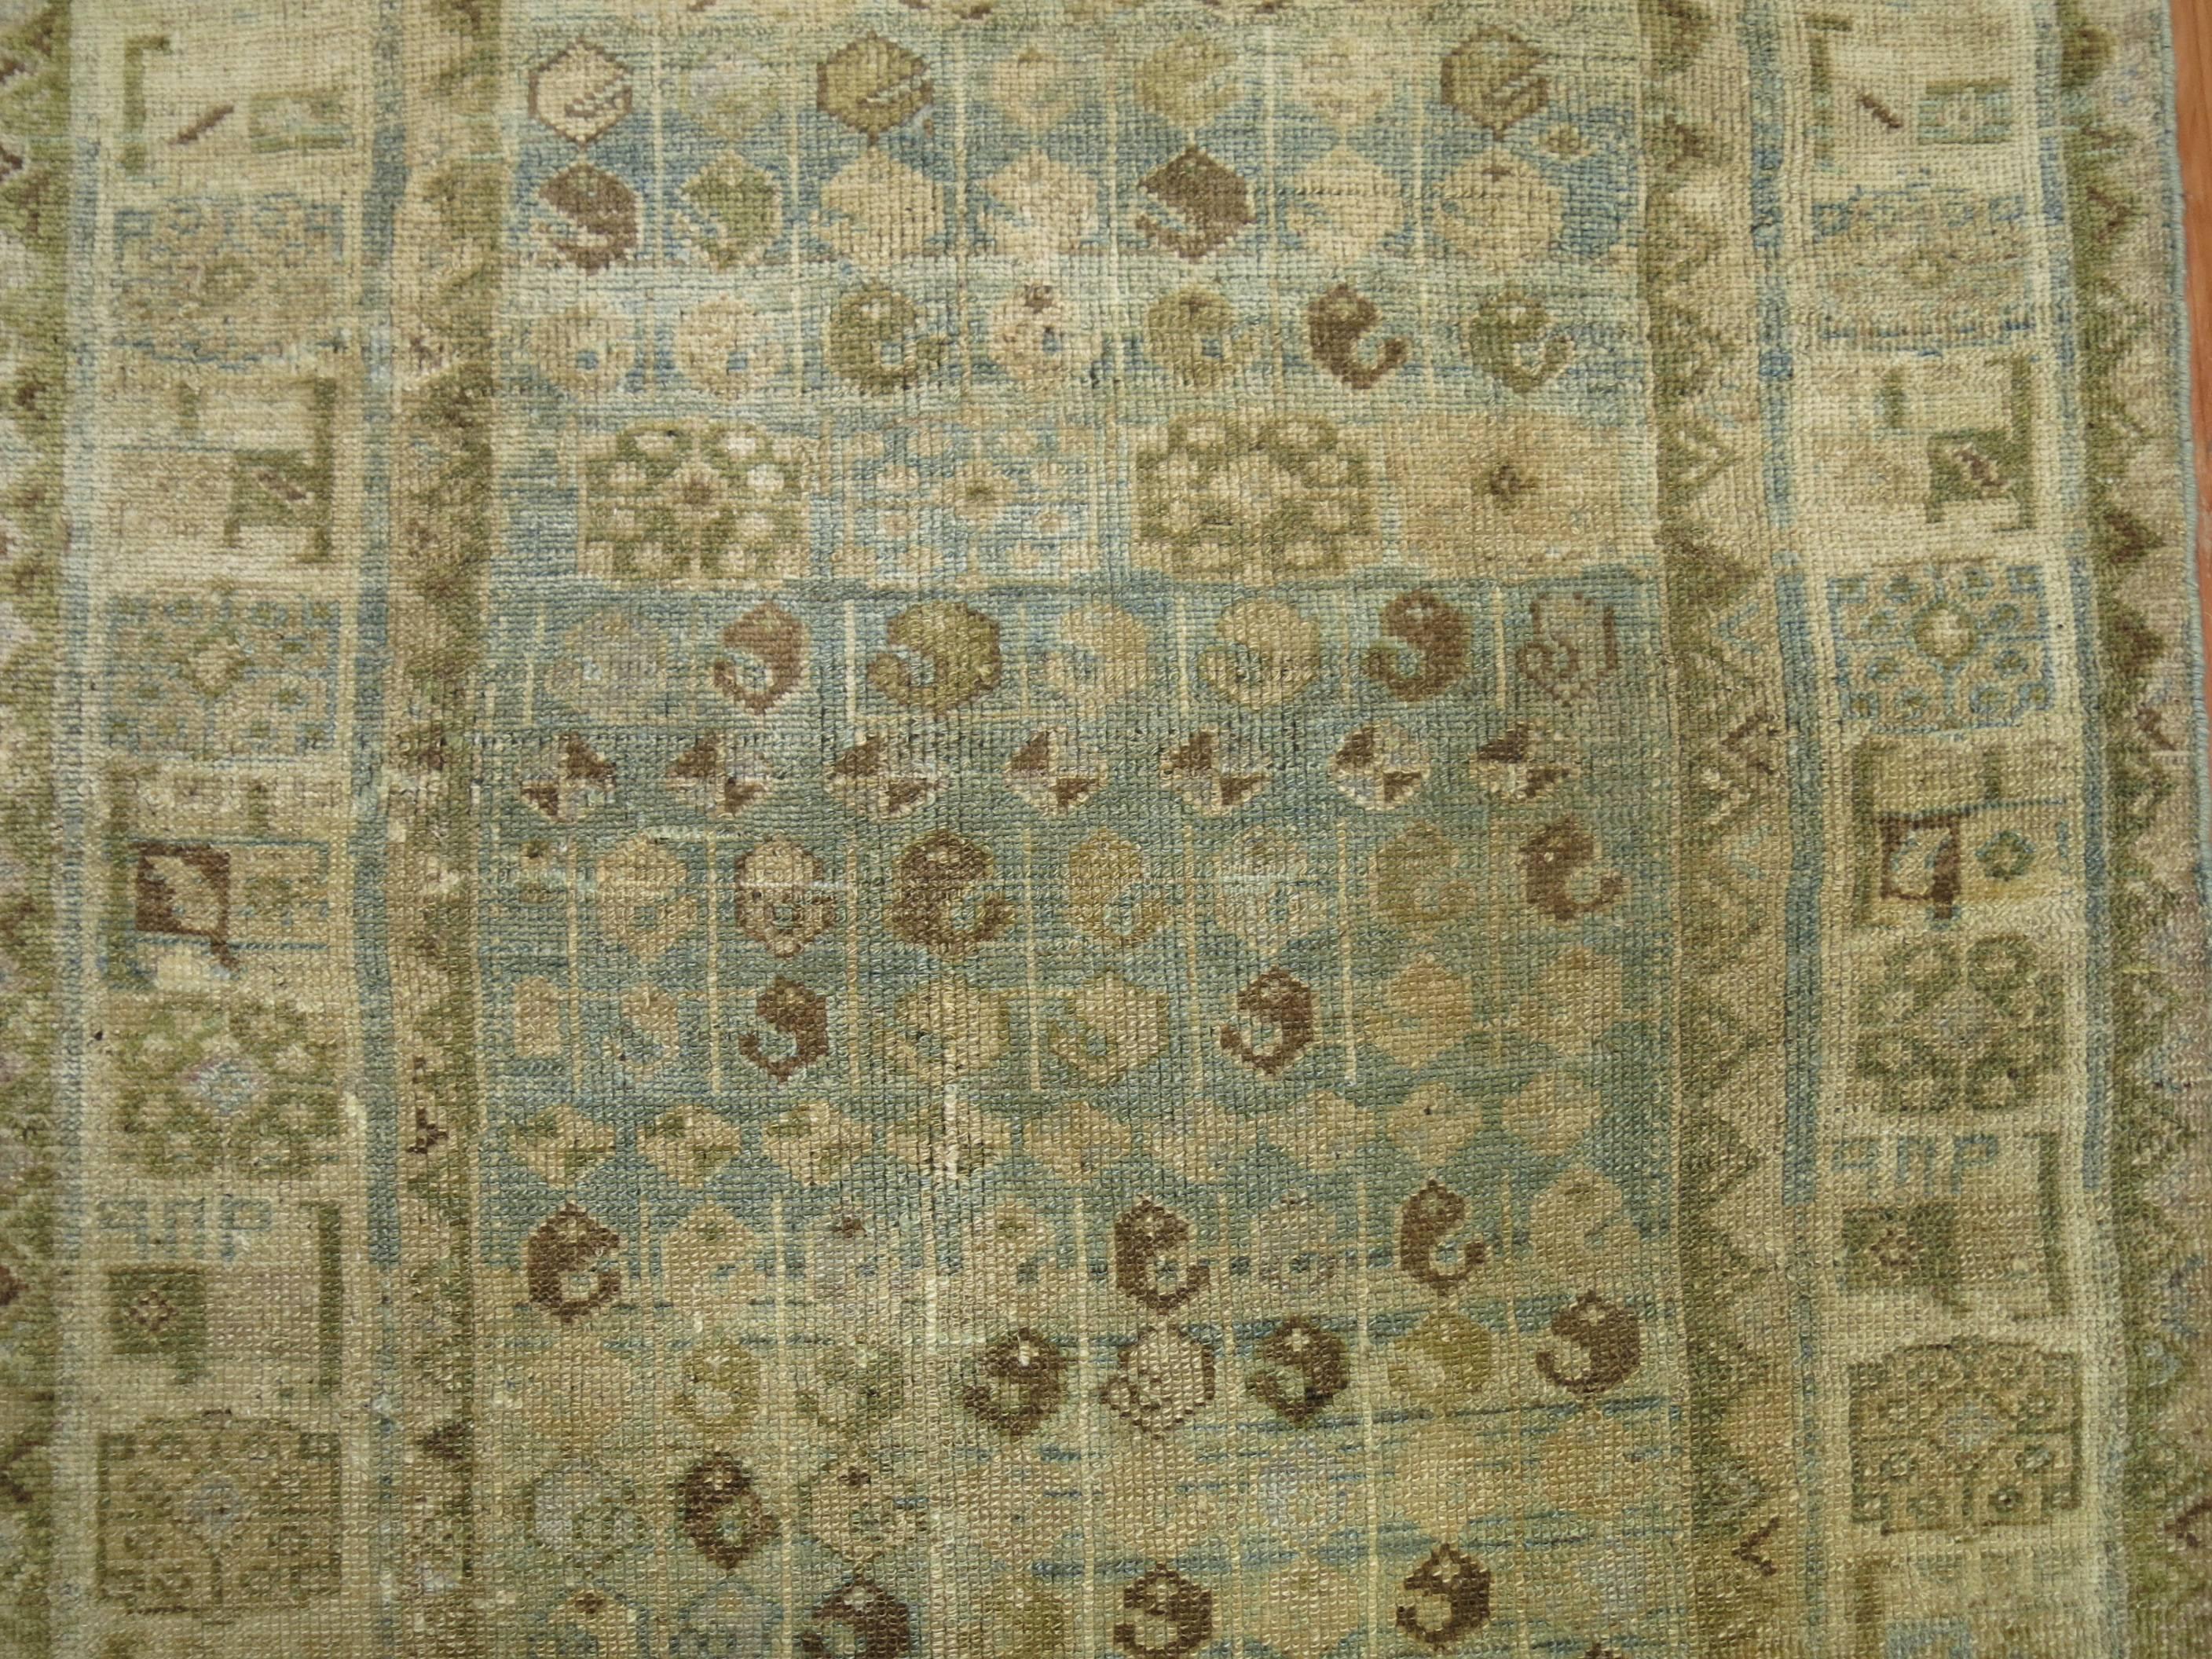 Hand-Woven Sky Ocean Blue Persian Malayer Accent 20th Century Rugs